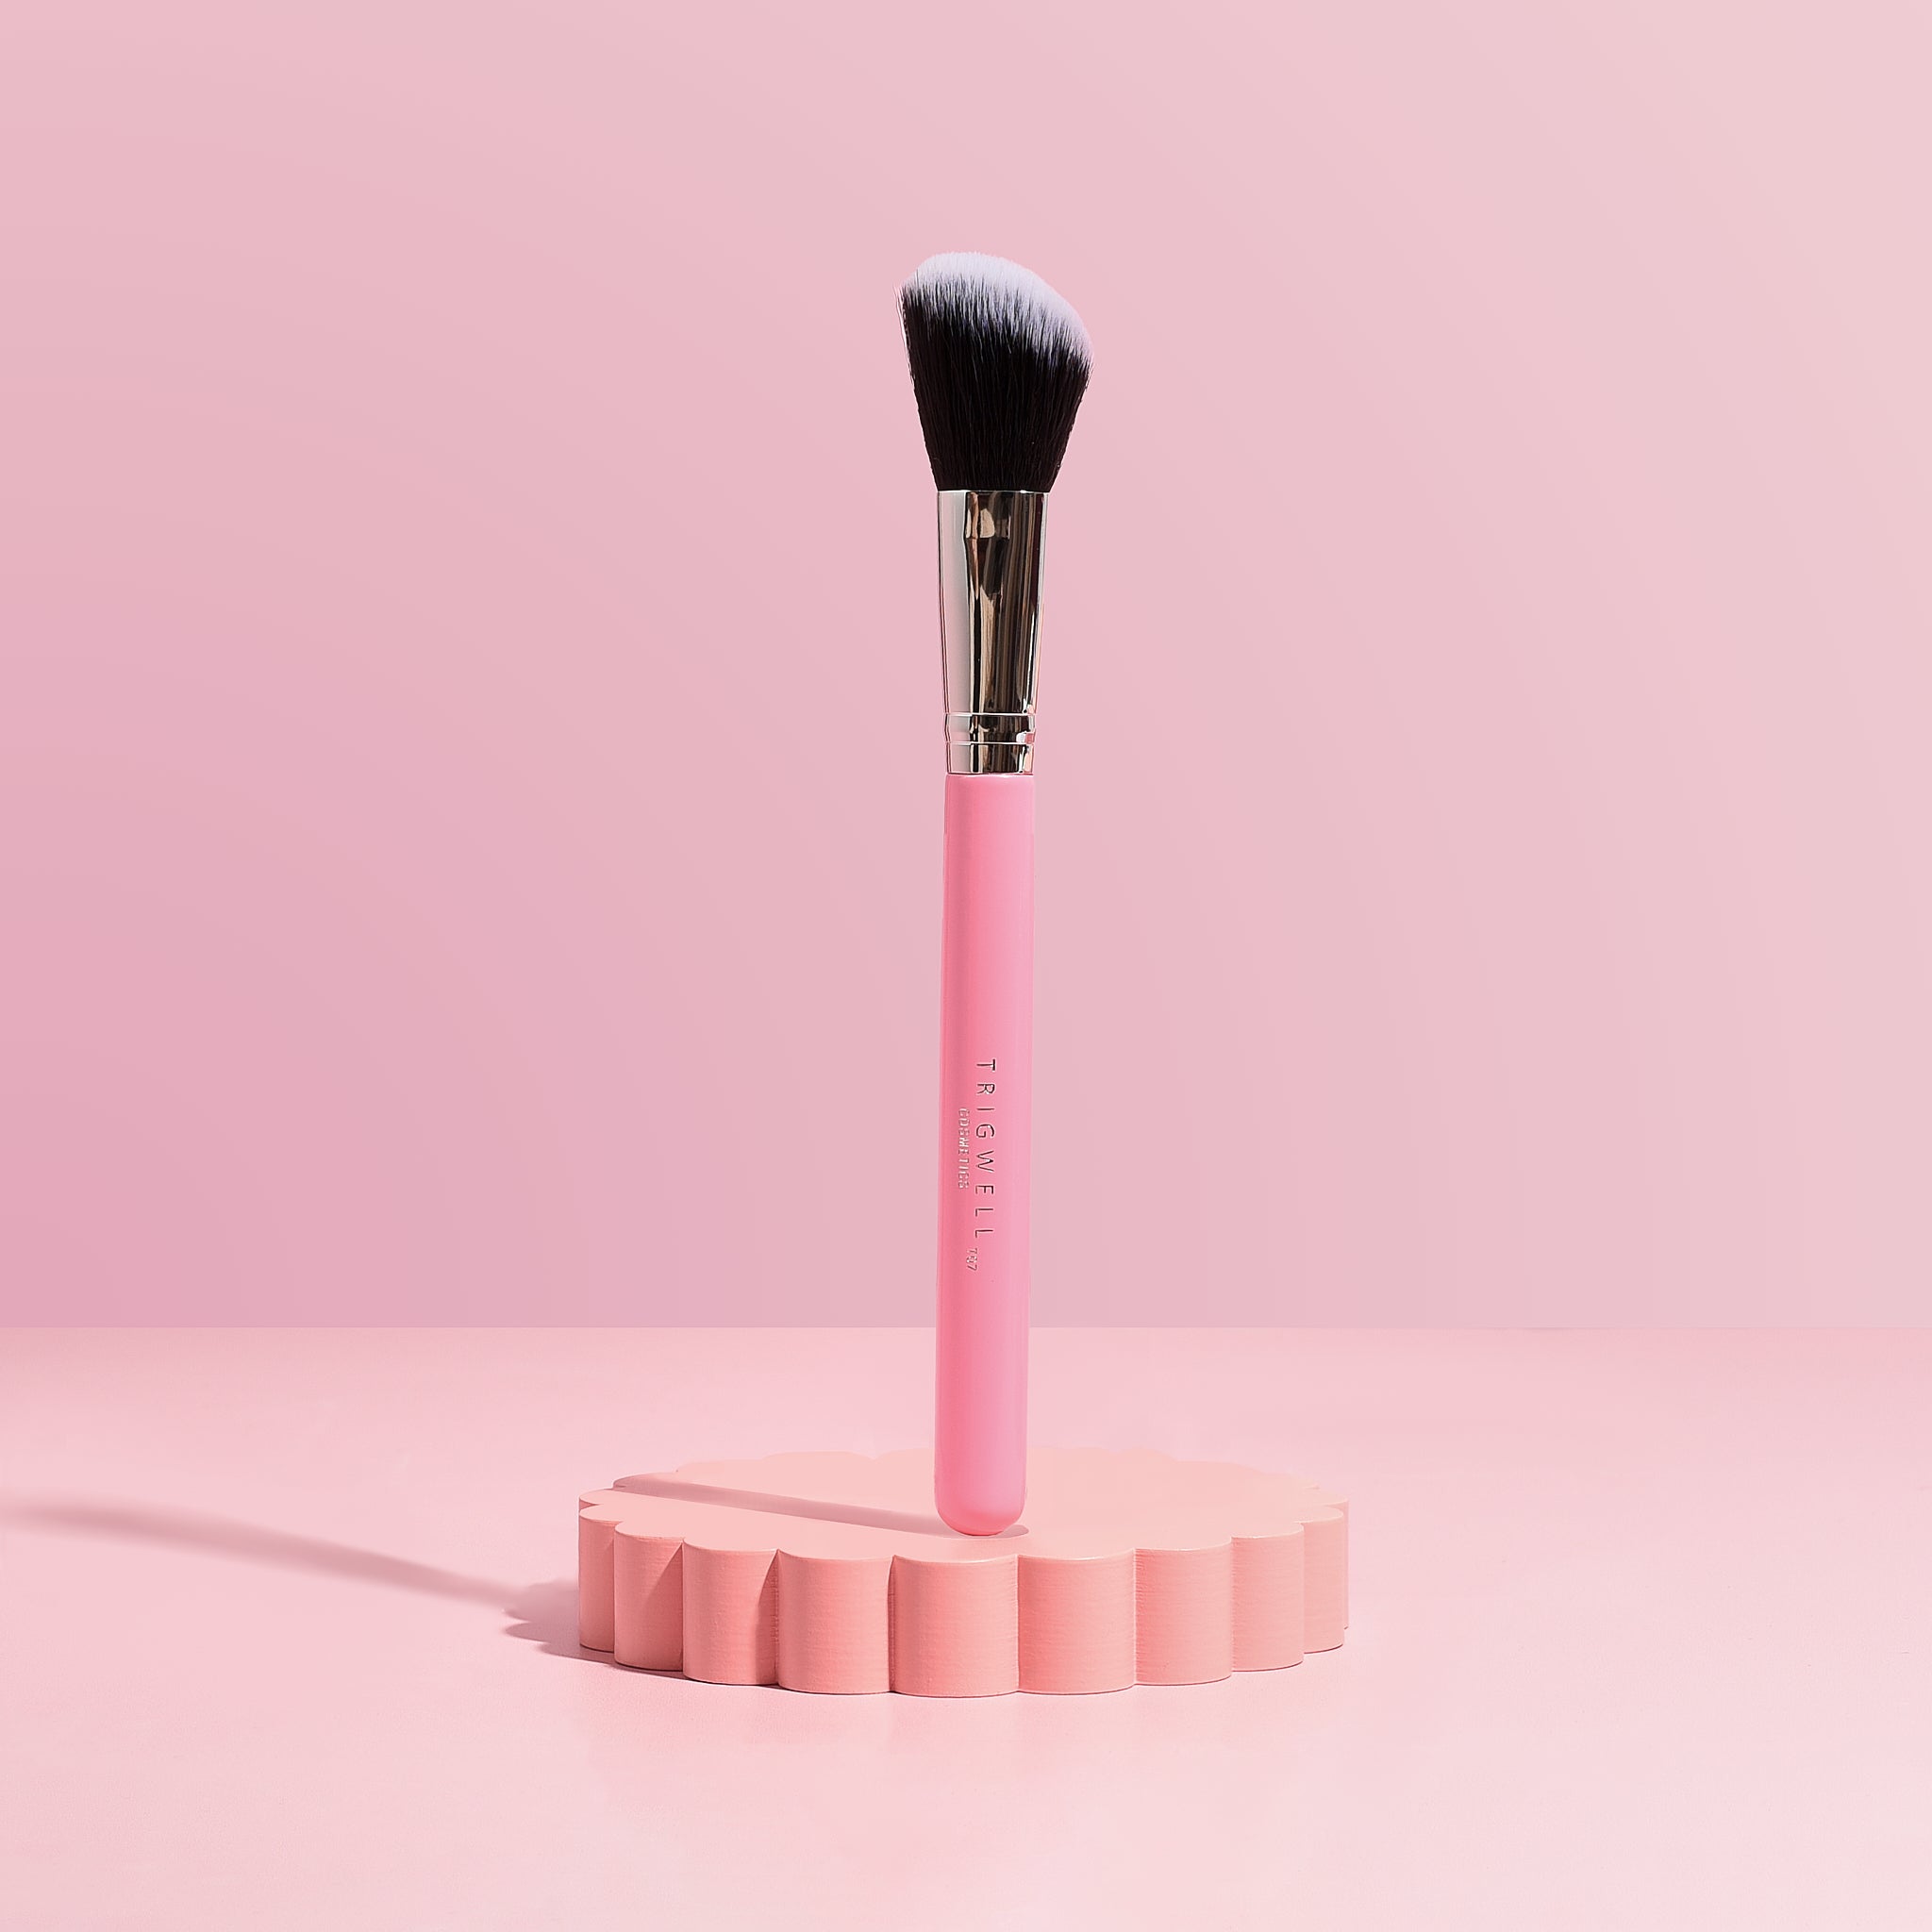 Image of T07 brush - bristles are angled to achieve precision when applying contour and bronzer